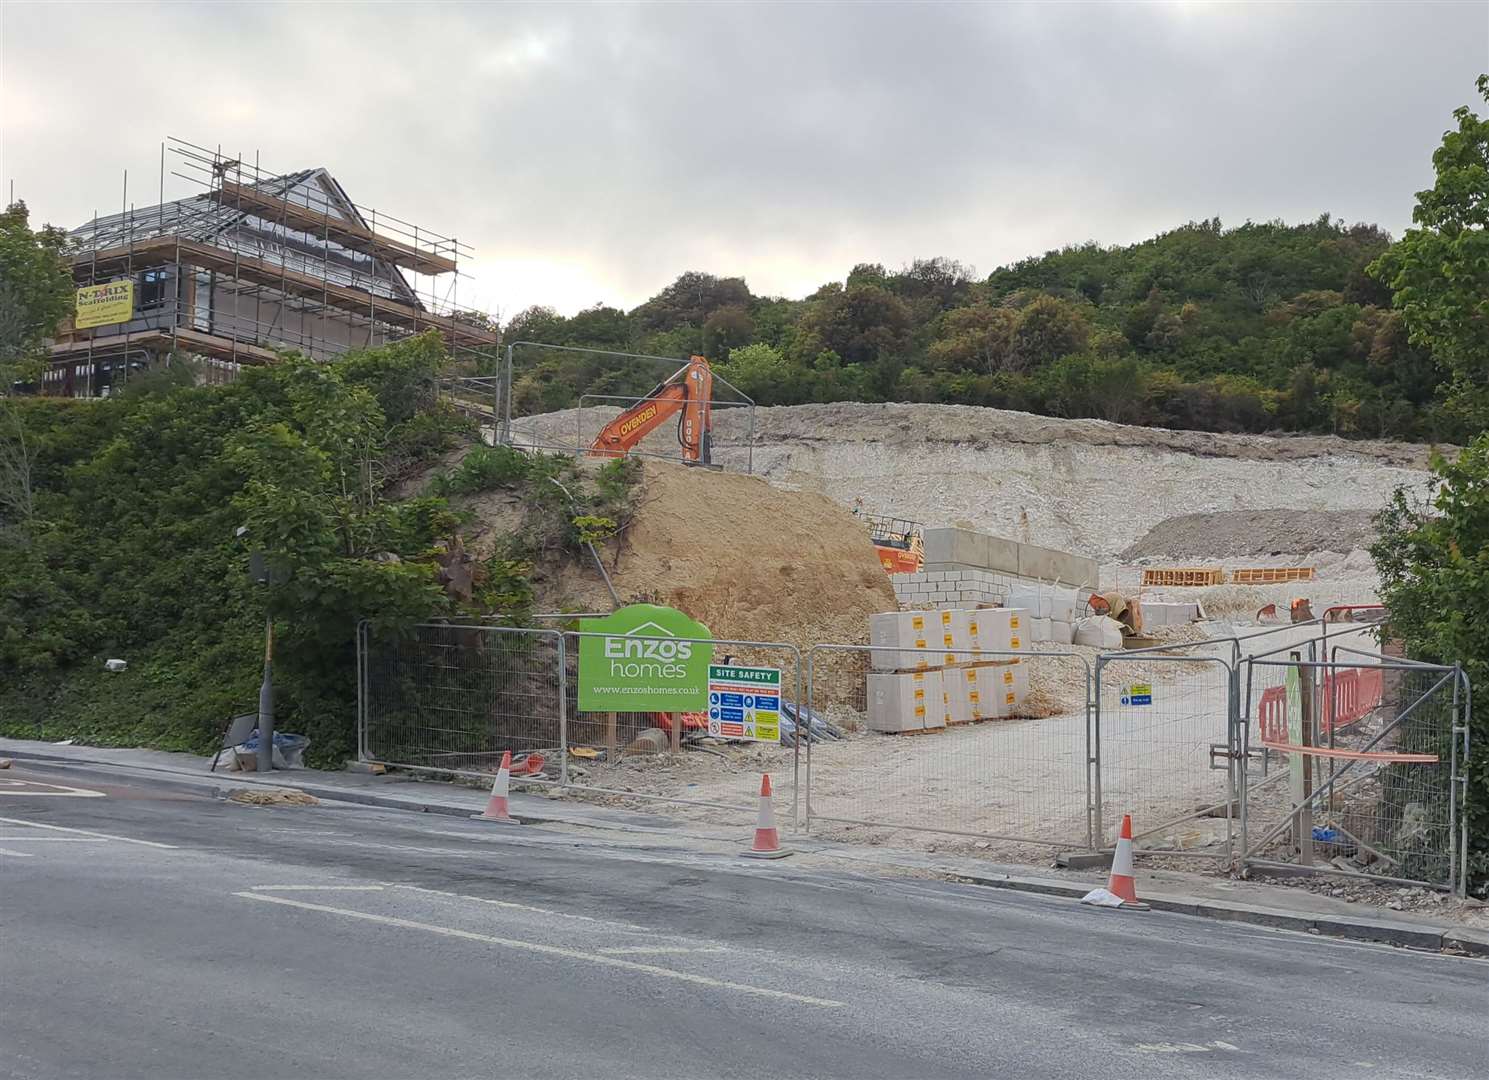 The view of the site from Folkestone Road, in Maxton